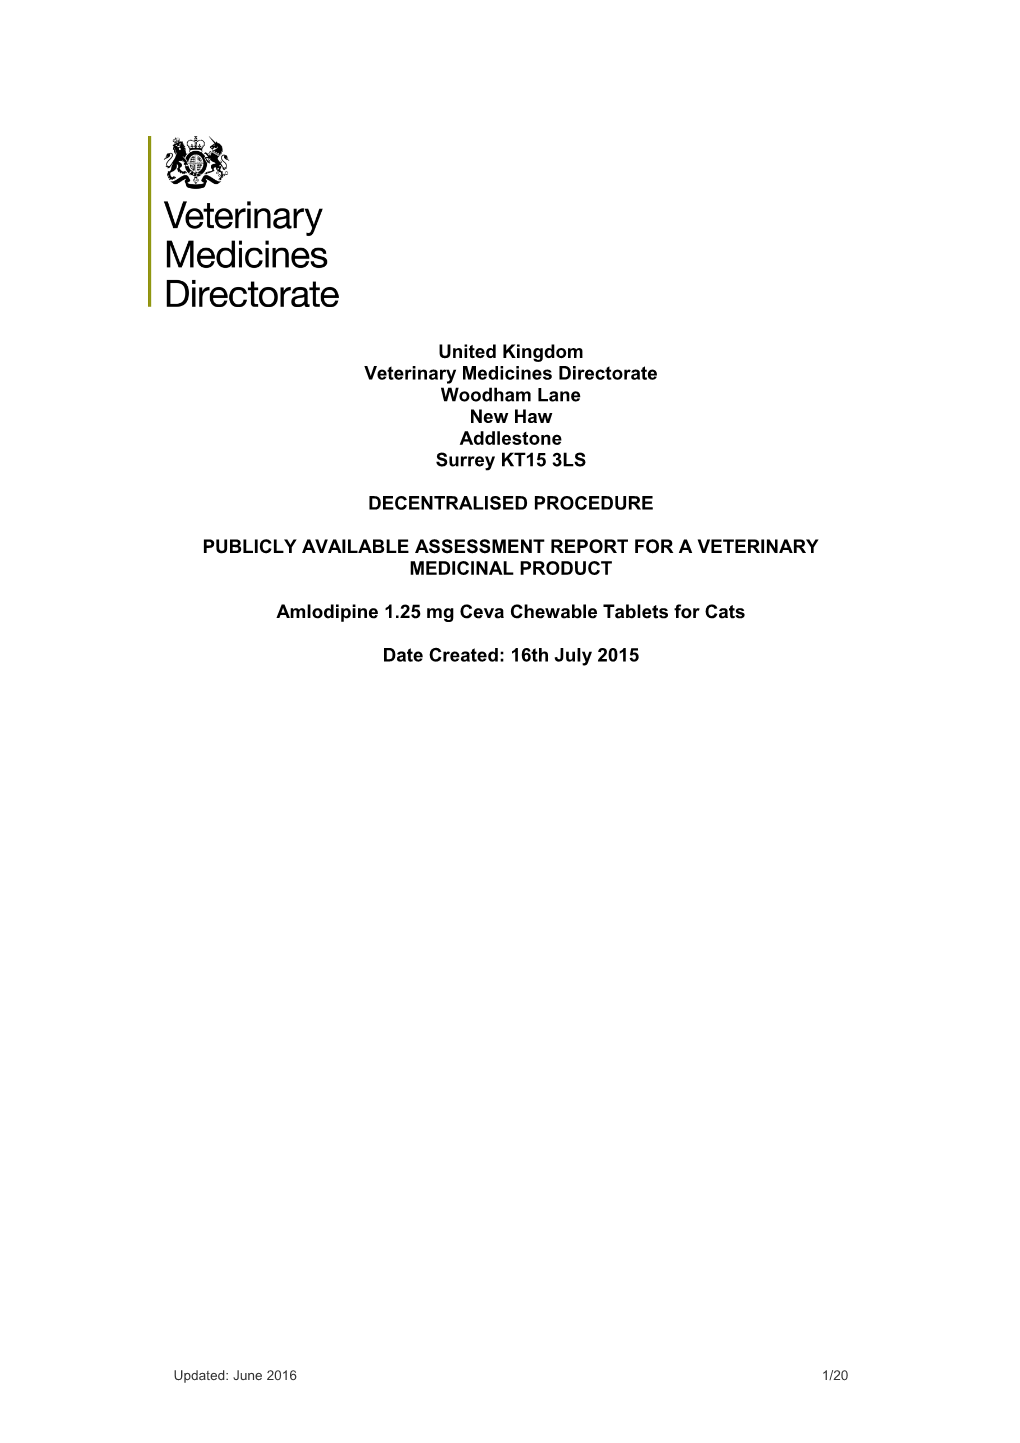 Publicly Available Assessment Report for a Veterinary Medicinal Product s2